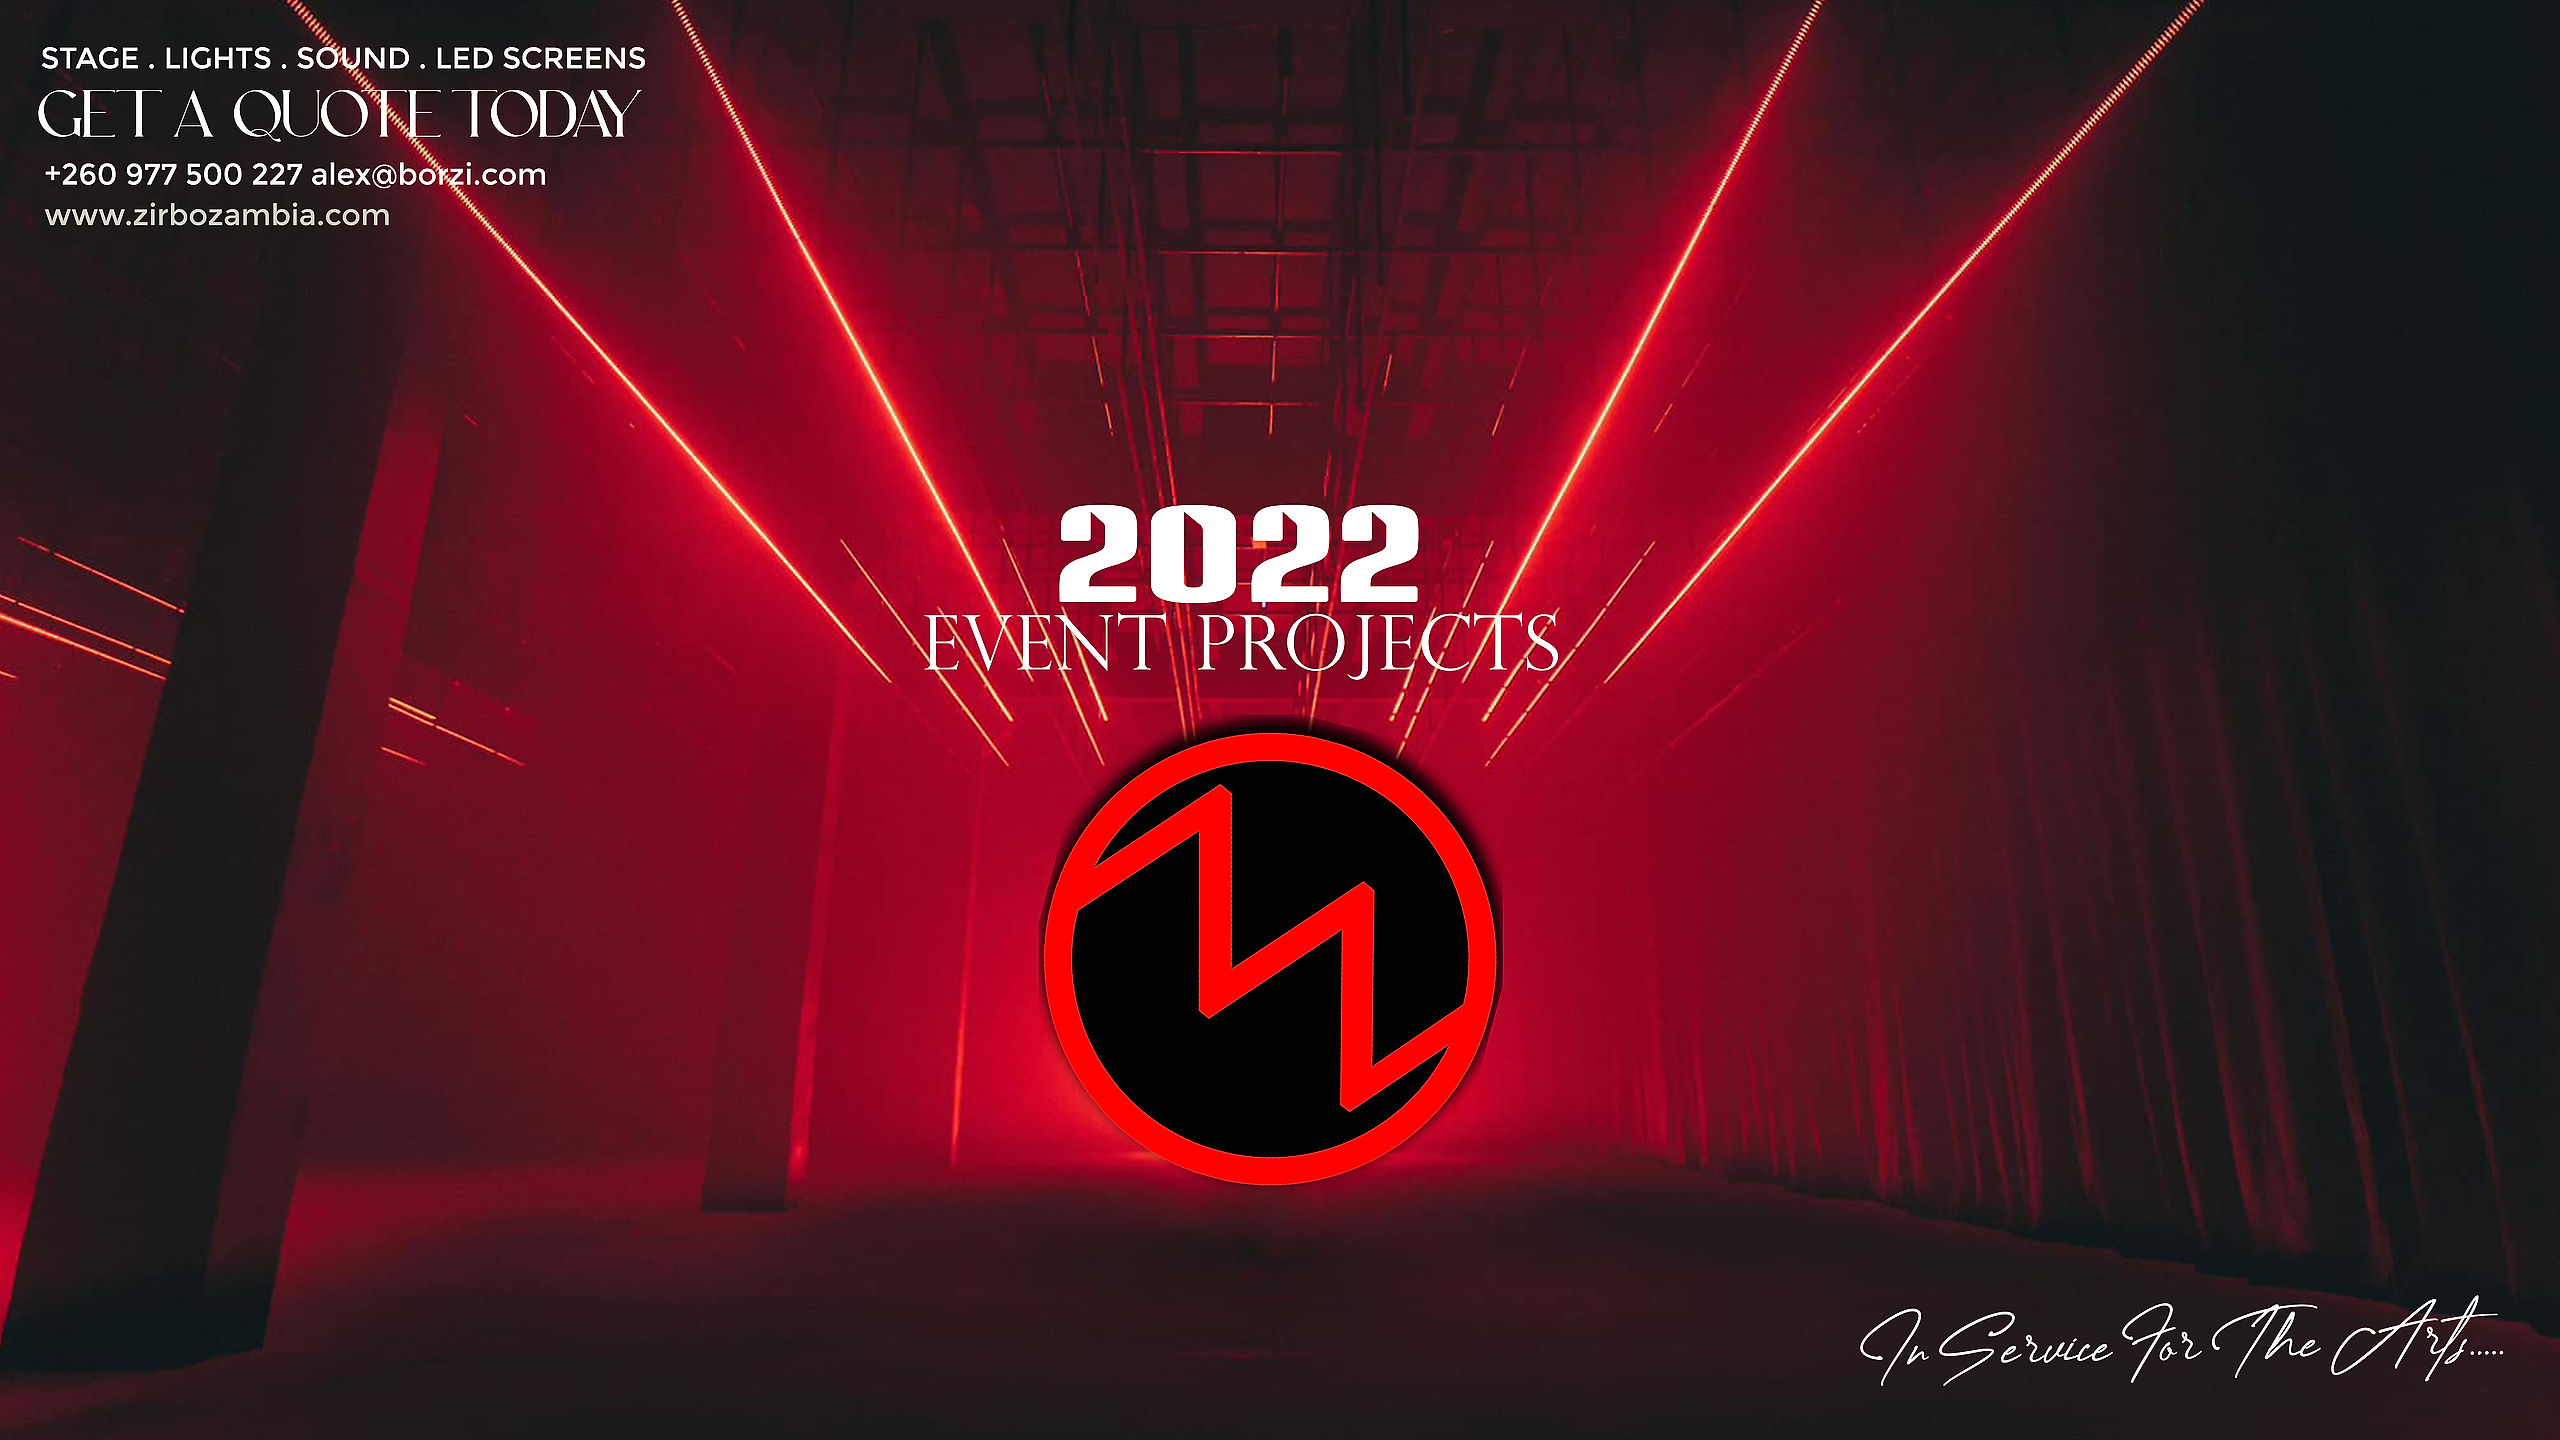 ZIRBO ZAMBIA - EVENT PROJECTS - 2022